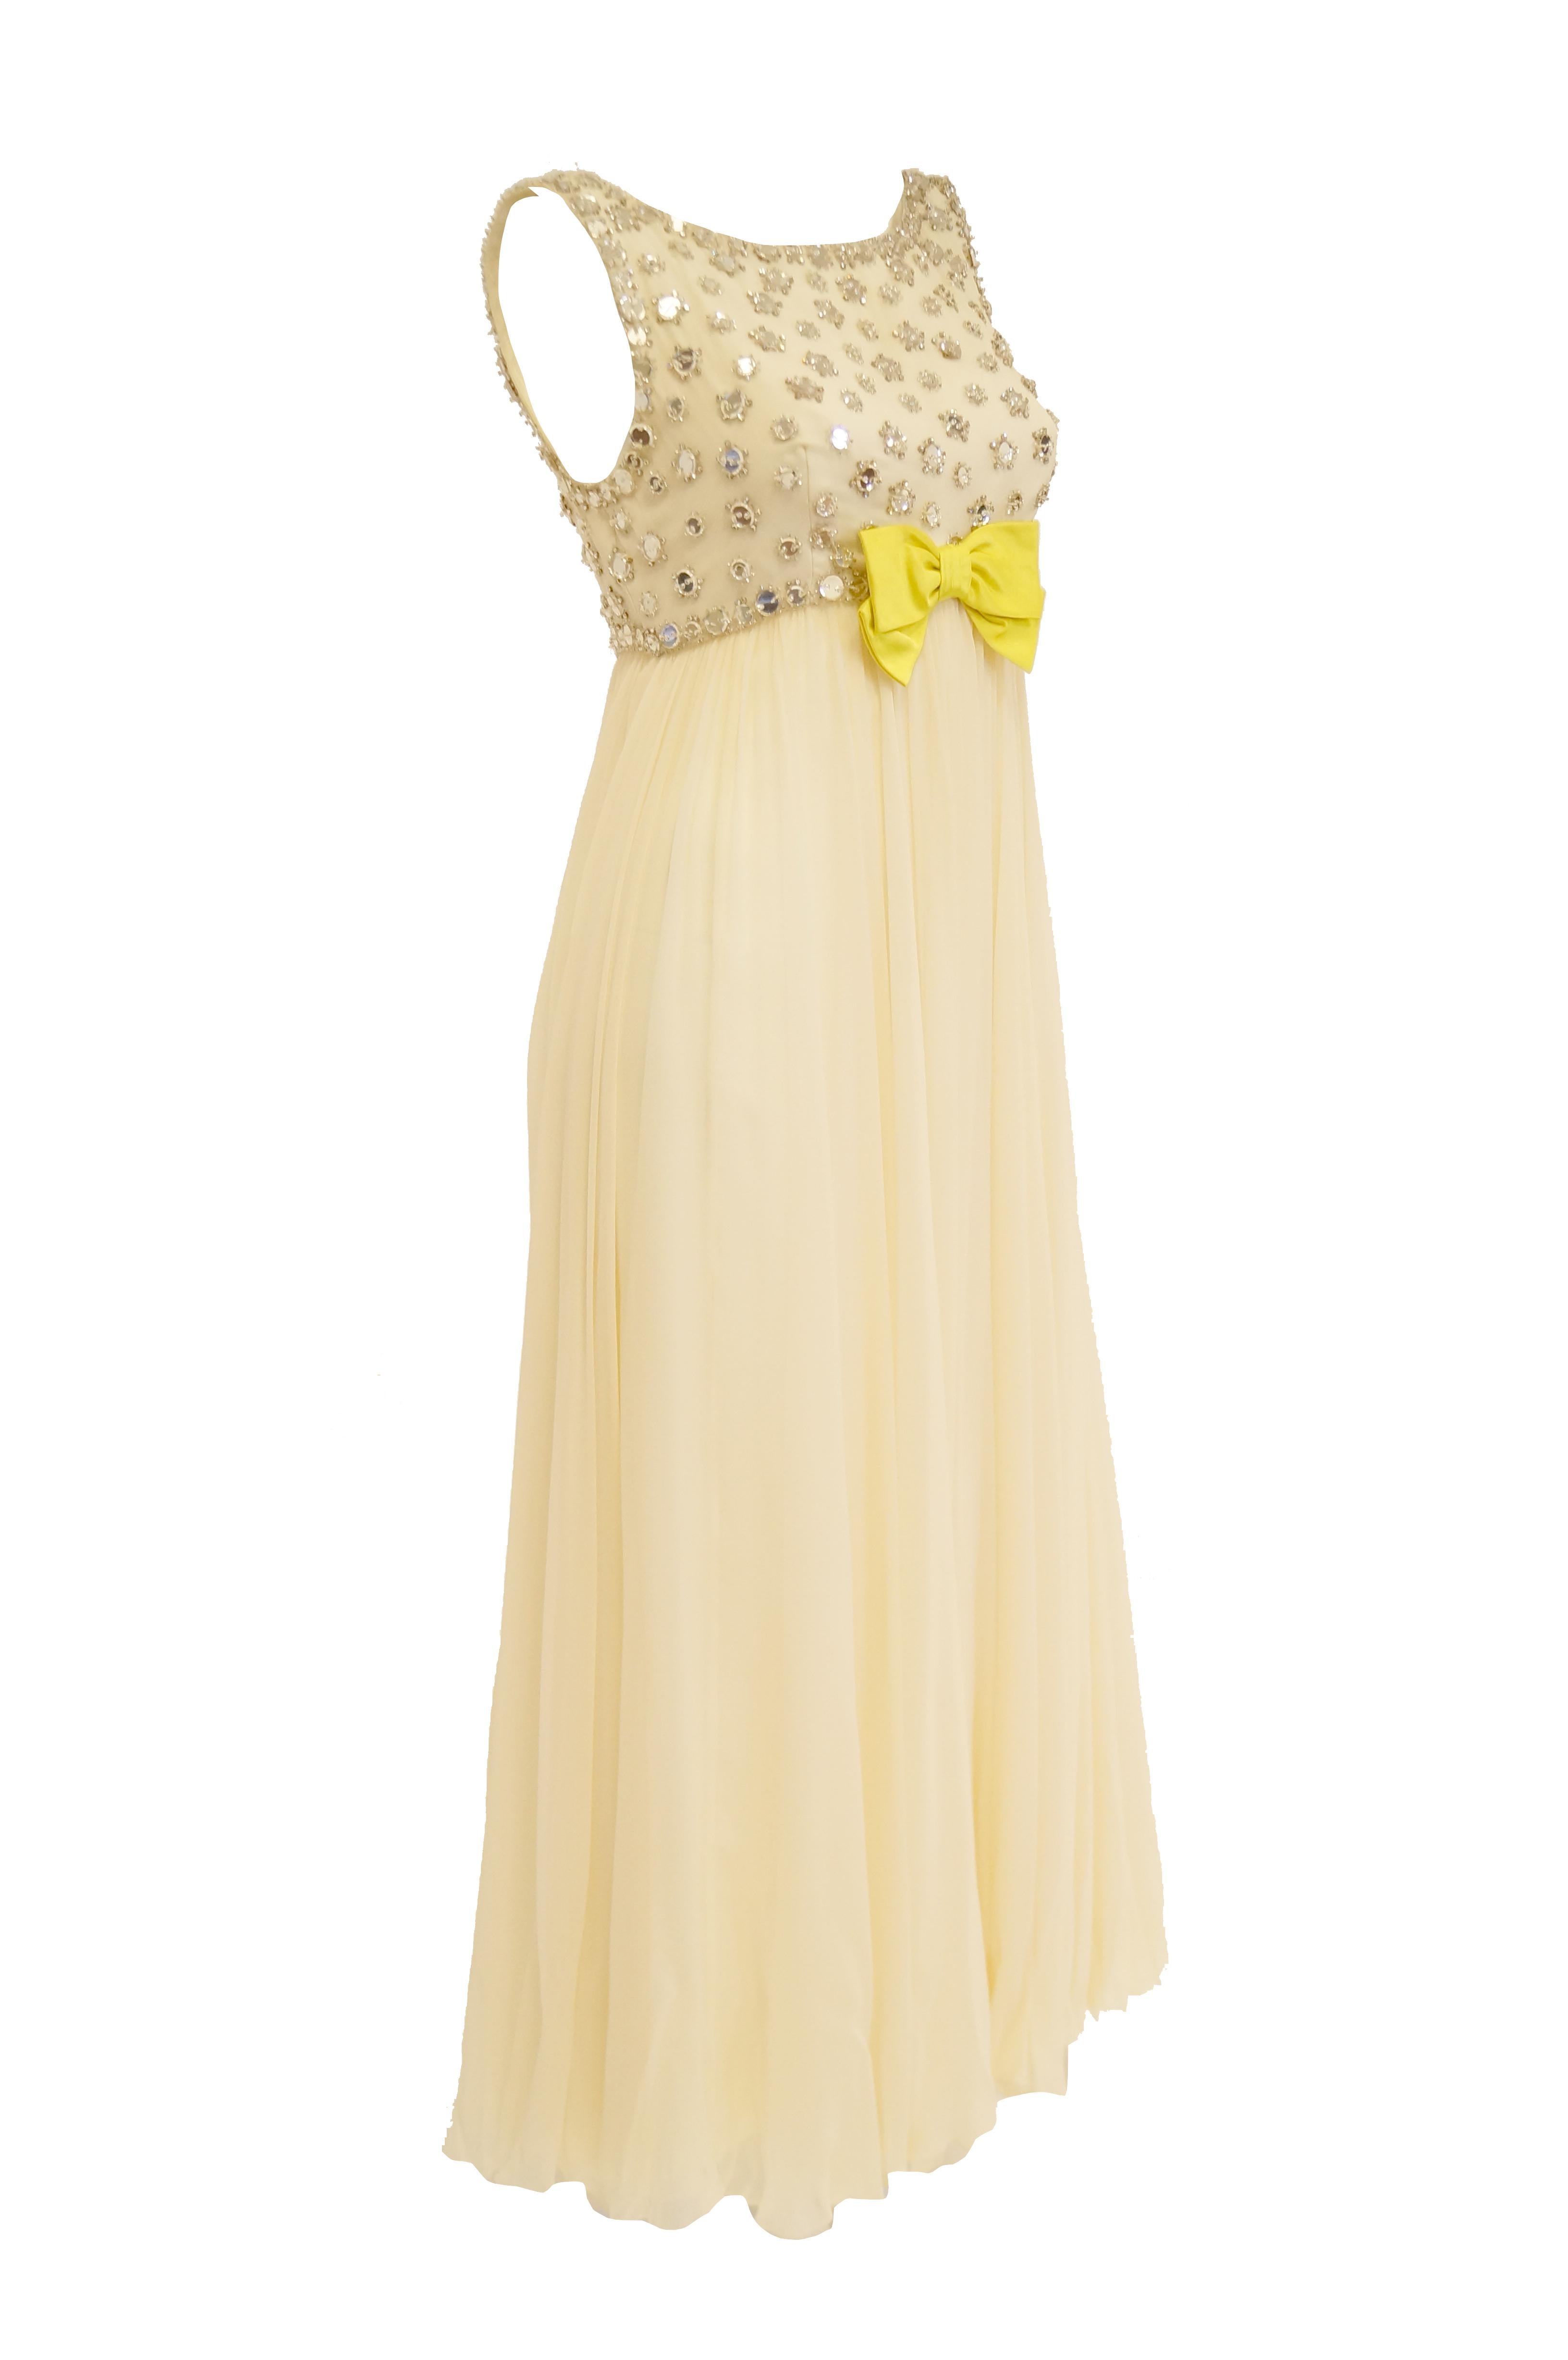 Women's  1960s Lillie Rubin Cream Dress with Neon Yellow Bow and Mirror Sequin Detail